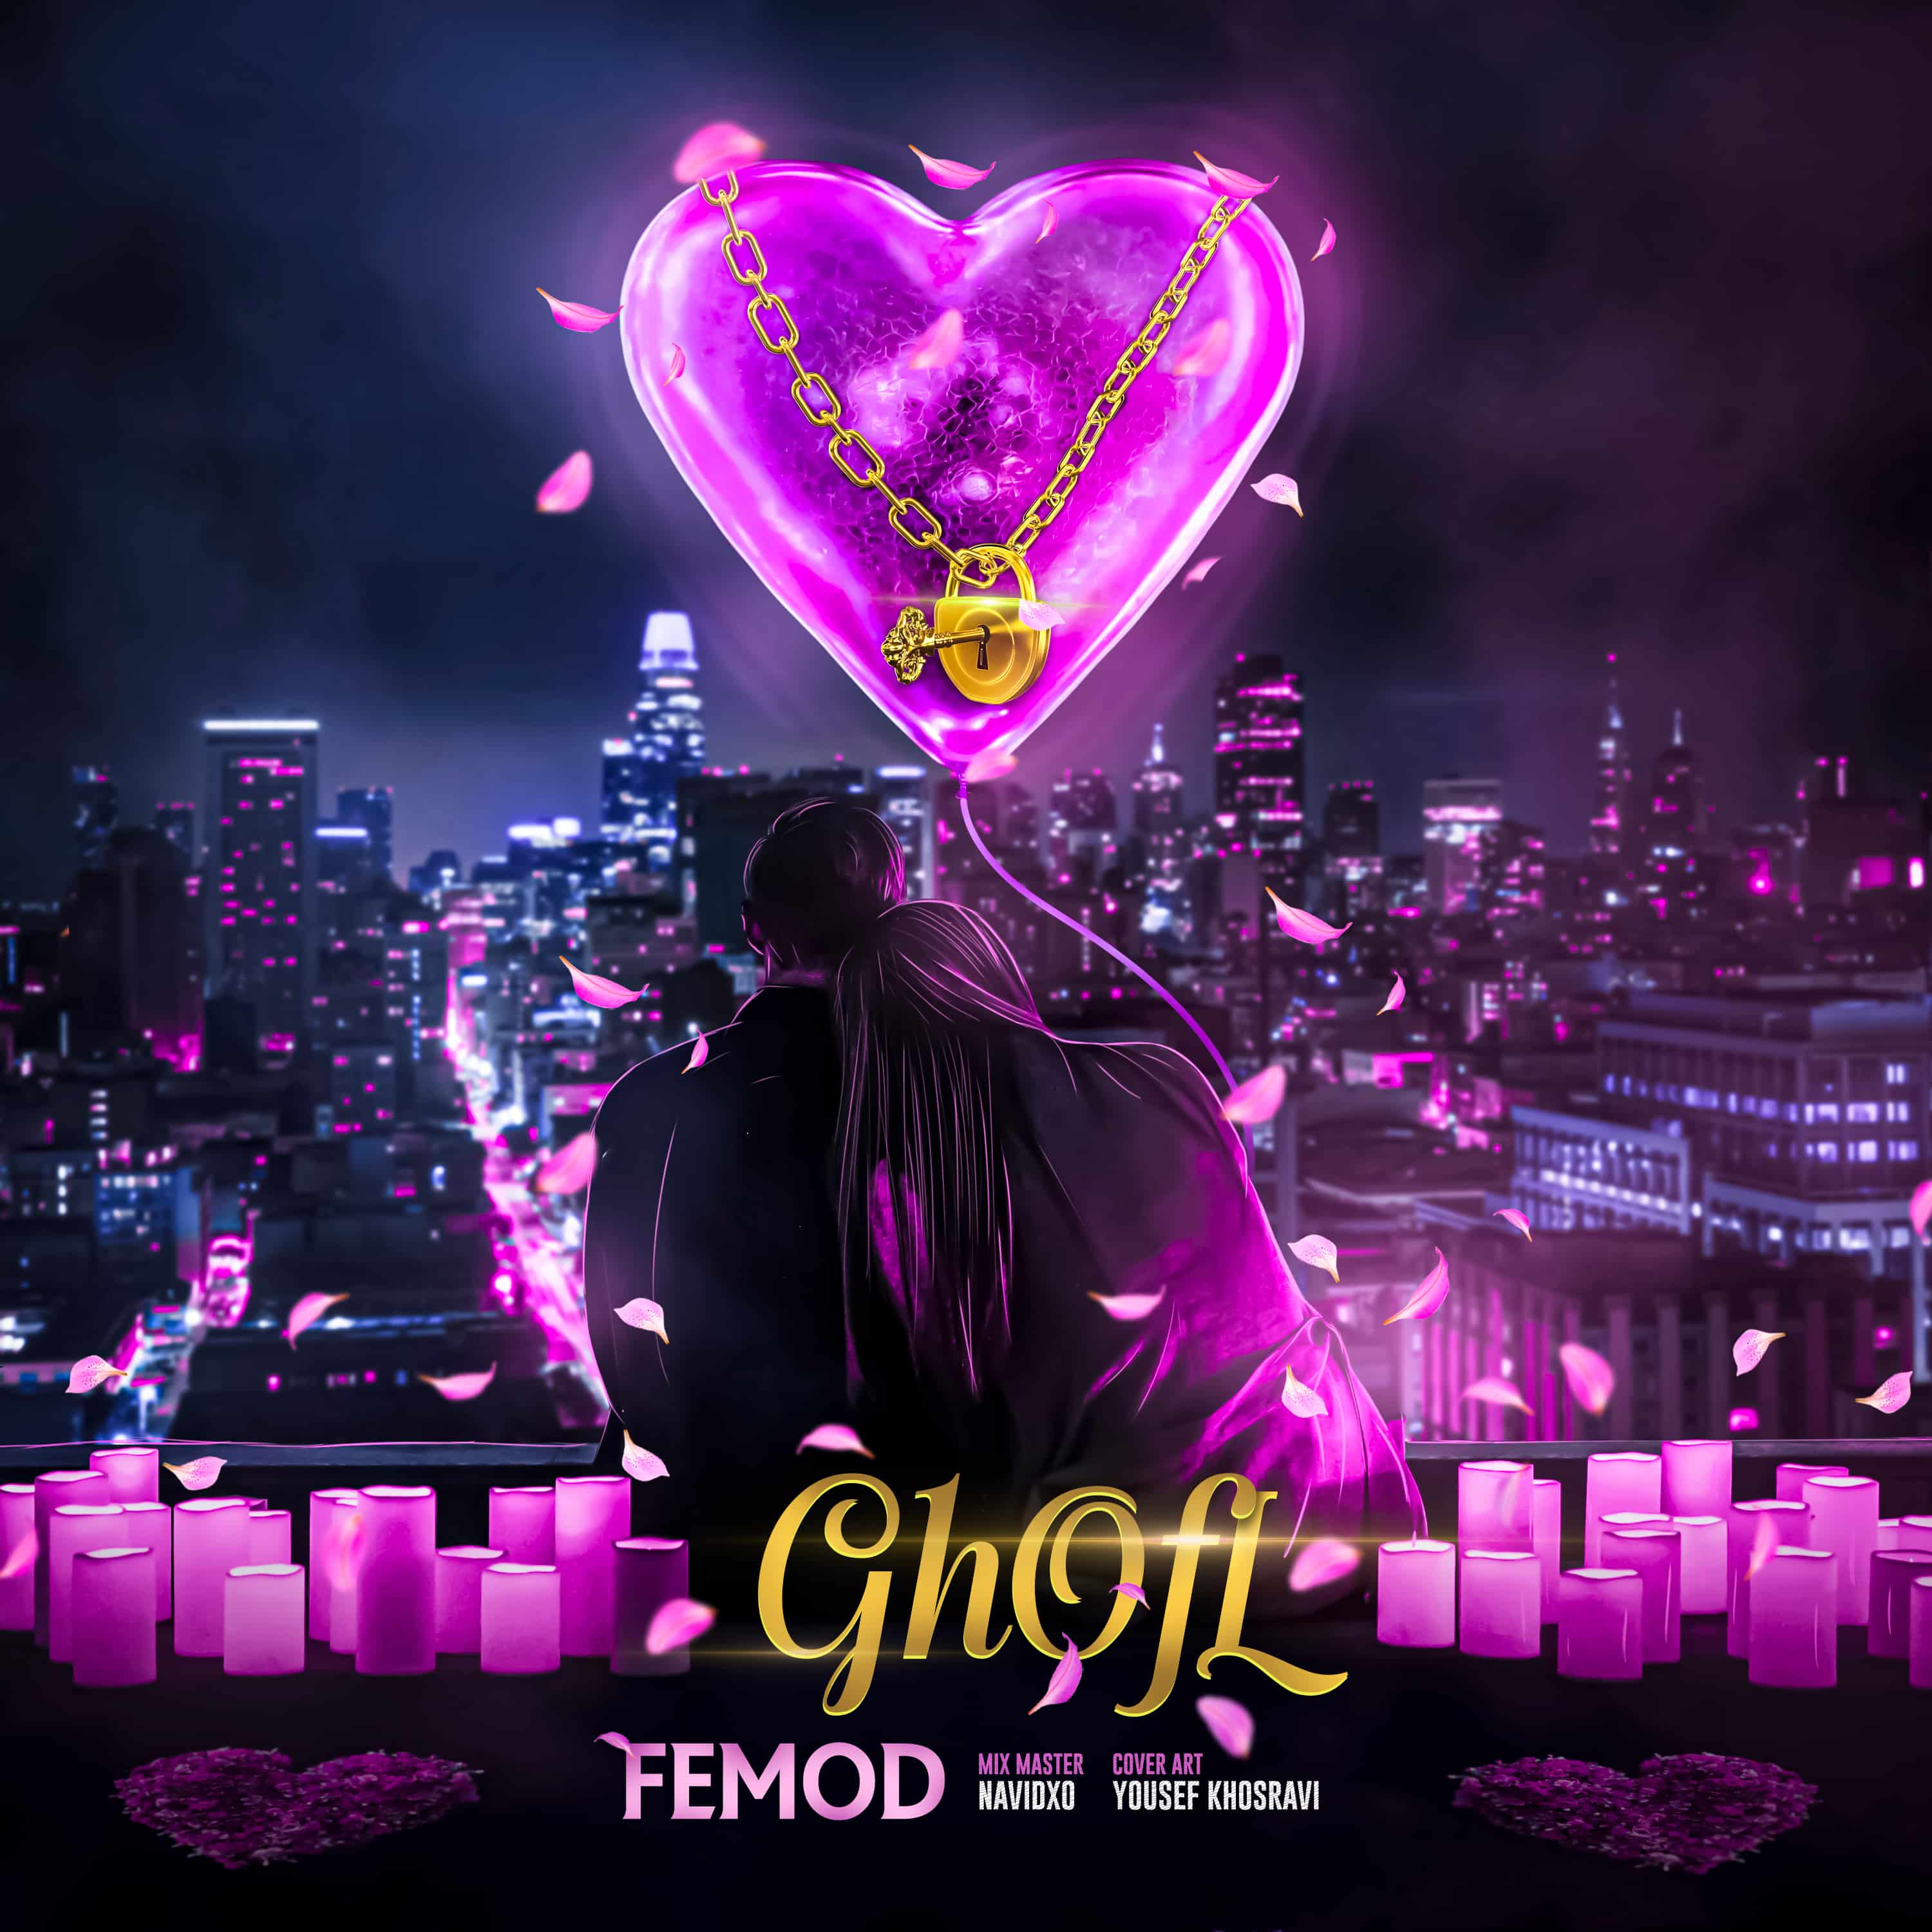 Cover Ghofl Femod Design By @ikhosravy